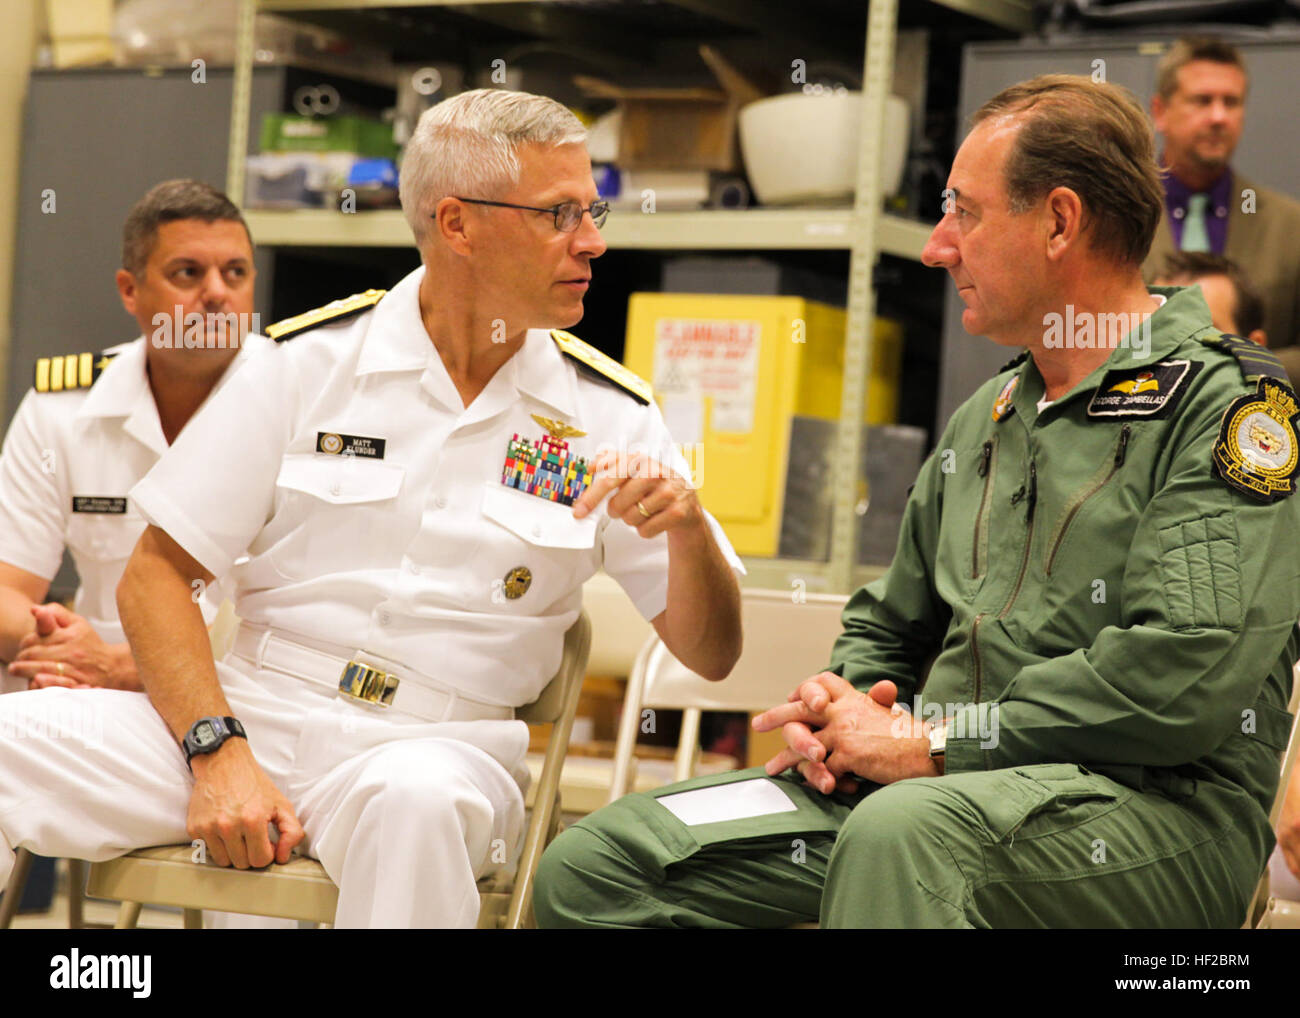 The First Sea Lord and Chief of Naval Staff of the British Royal Navy, Adm. Sir George Zambellas, right, speaks with U.S. Navy Rear Adm. Matthew L. Klunder during a visit at Naval Surface Warfare Center at Dahlgren, Va., July 29, 2014. Zambellas is taking part in the Commandant of the Marine Corps' Counterpart Program, which invites foreign military leaders to visit the United States and interact with U.S. military leaders. (U.S. Marine Corps photo by Cpl. Michael C. Guinto/Released) First Sea Lord Counterpart Visit 140729-M-LI307-454 Stock Photo